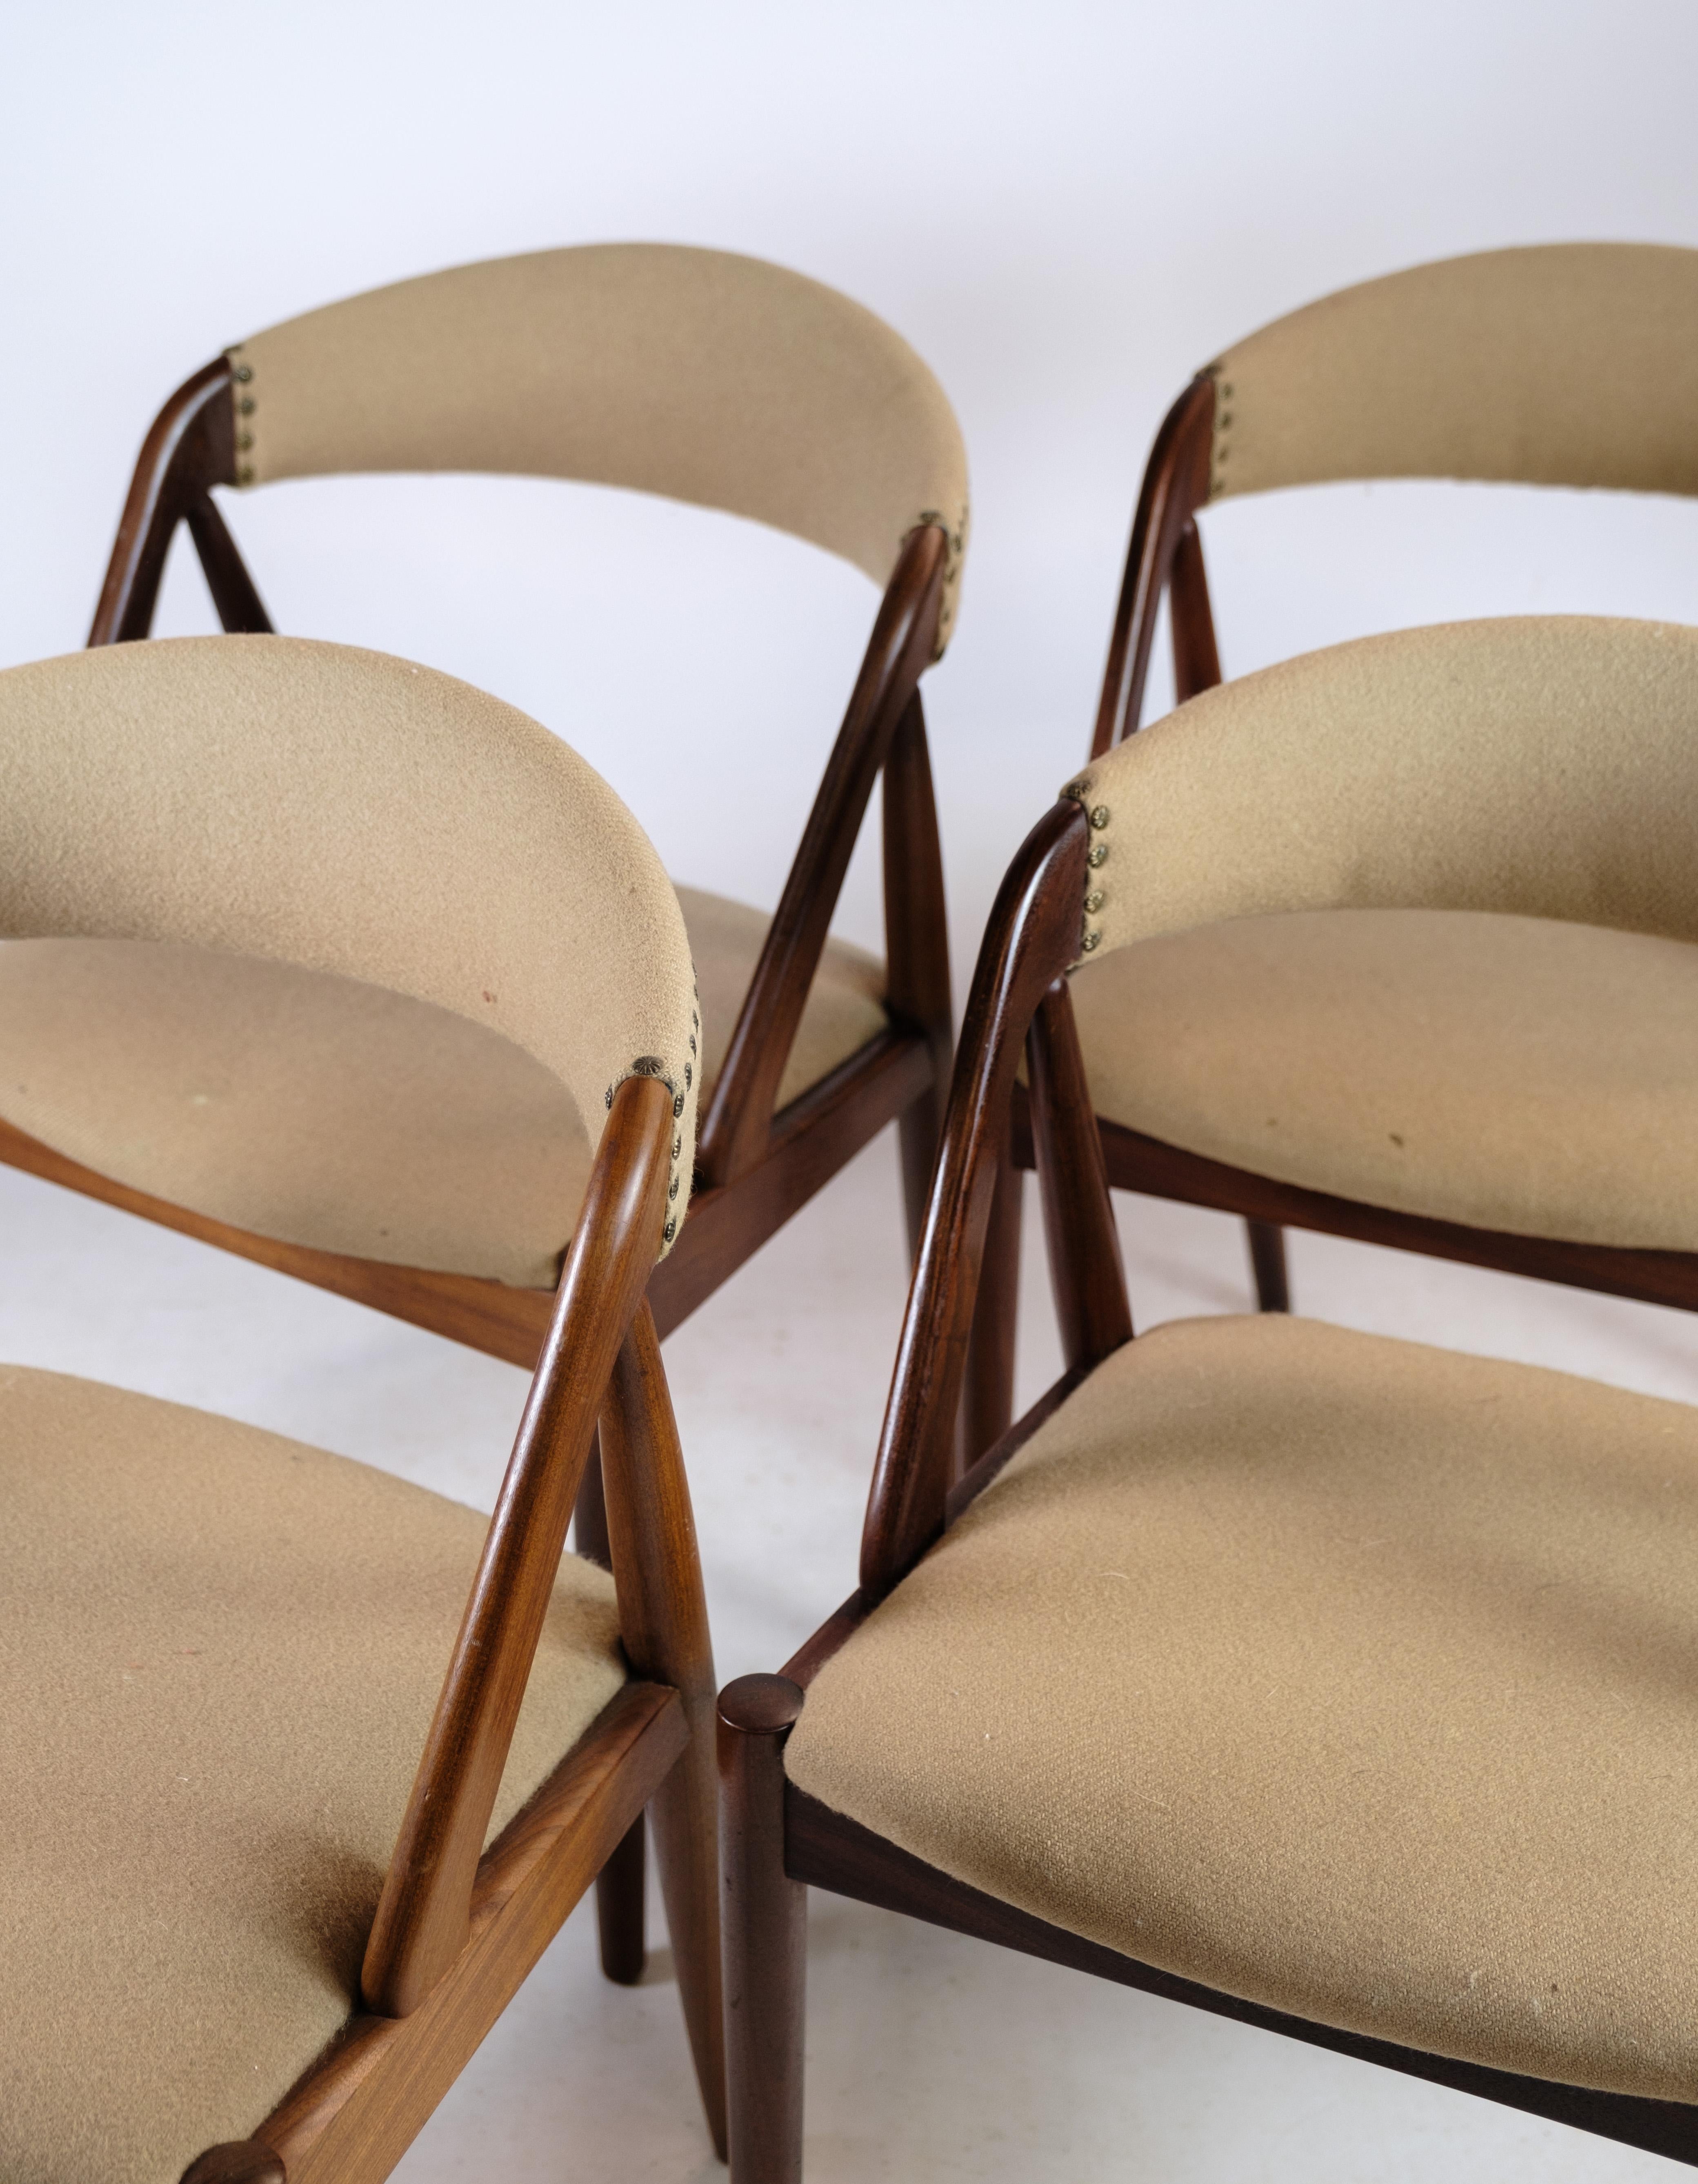 4 Dining Room Chairs Model 31 Made In Teak, Designed By Kai Kristiansen In Good Condition For Sale In Lejre, DK